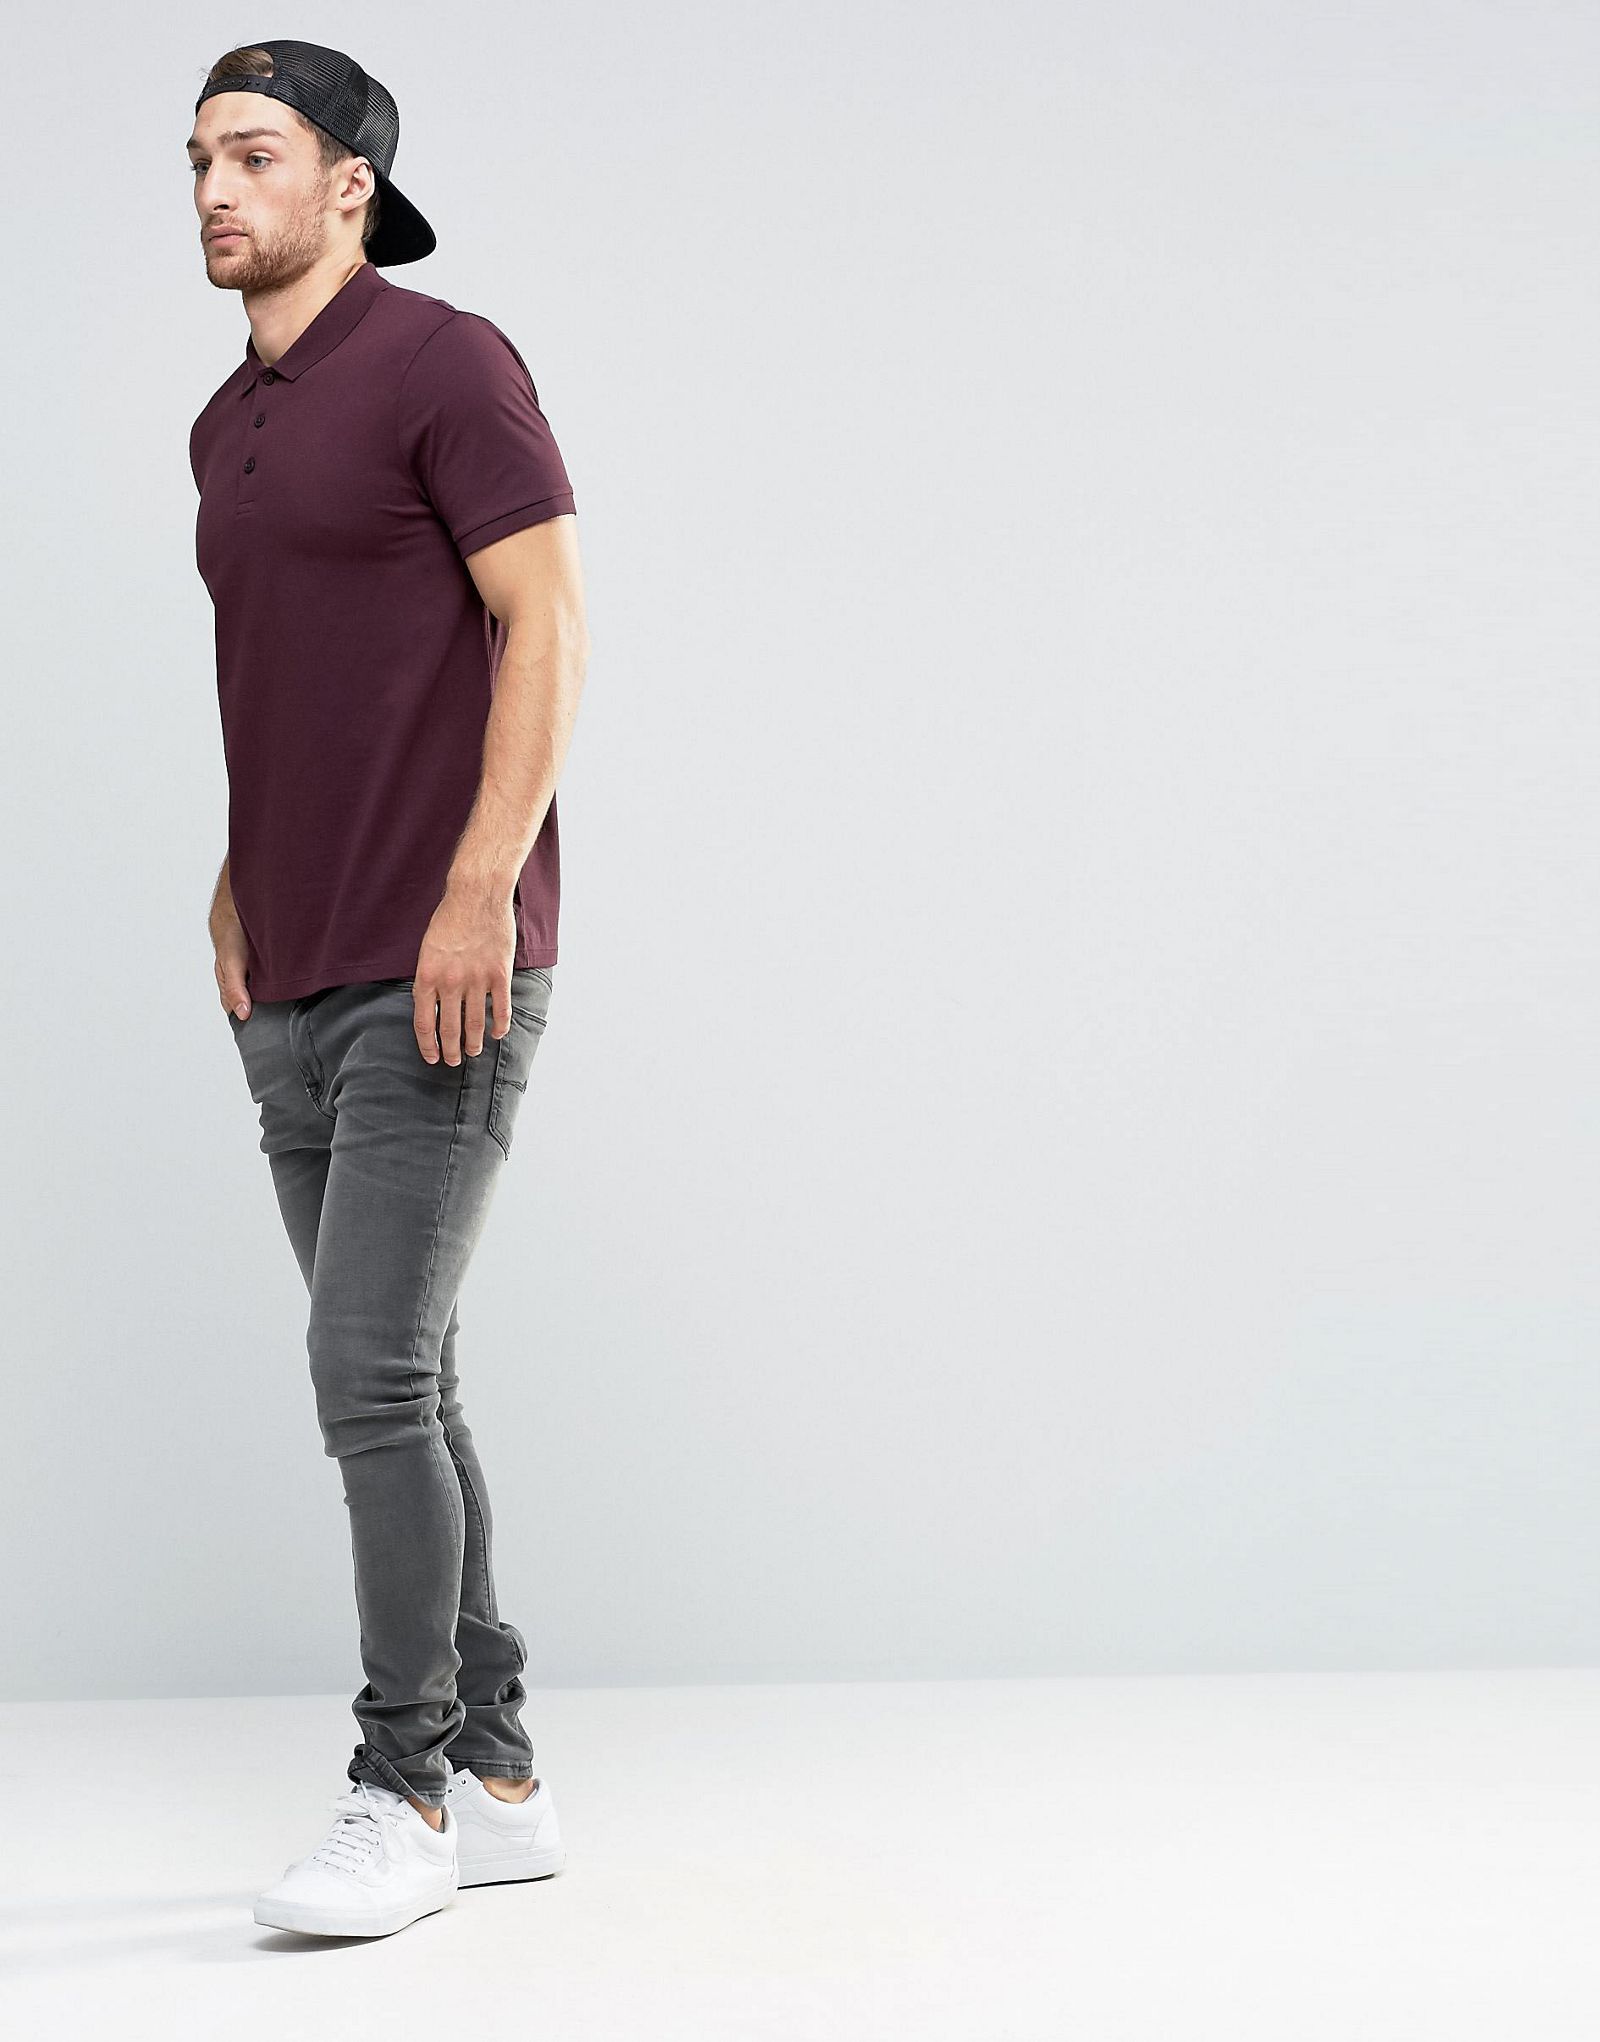 ASOS 2 Pack Jersey Polo Shirt SAVE 10% In Burgundy/Black